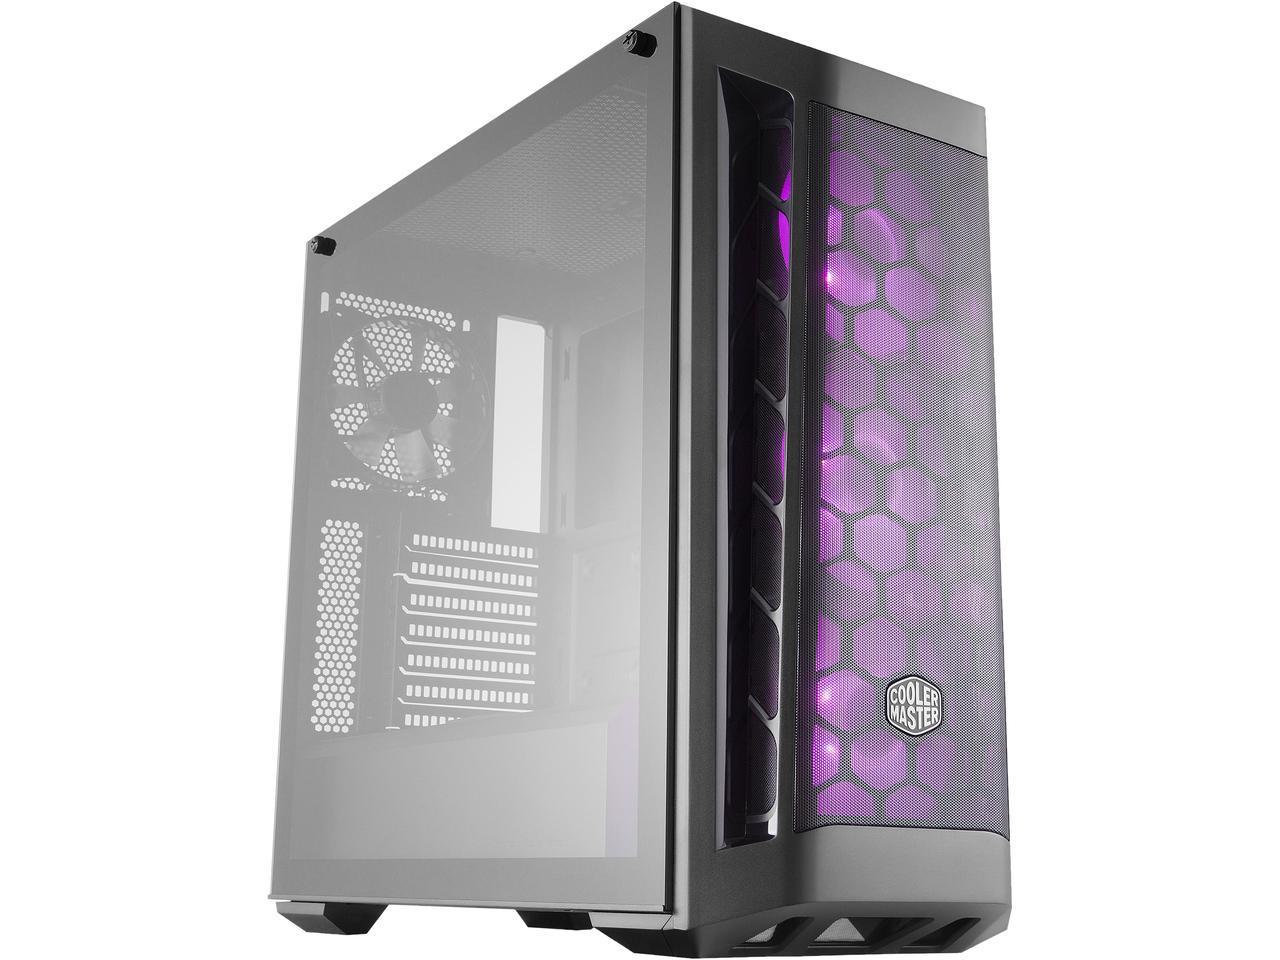 Cooler Master MCB-B511D-KGNN-RGB MasterBox MB511 RGB Systems Built for high Demand Gaming can Breathe Easy Through The mesh Front Panel